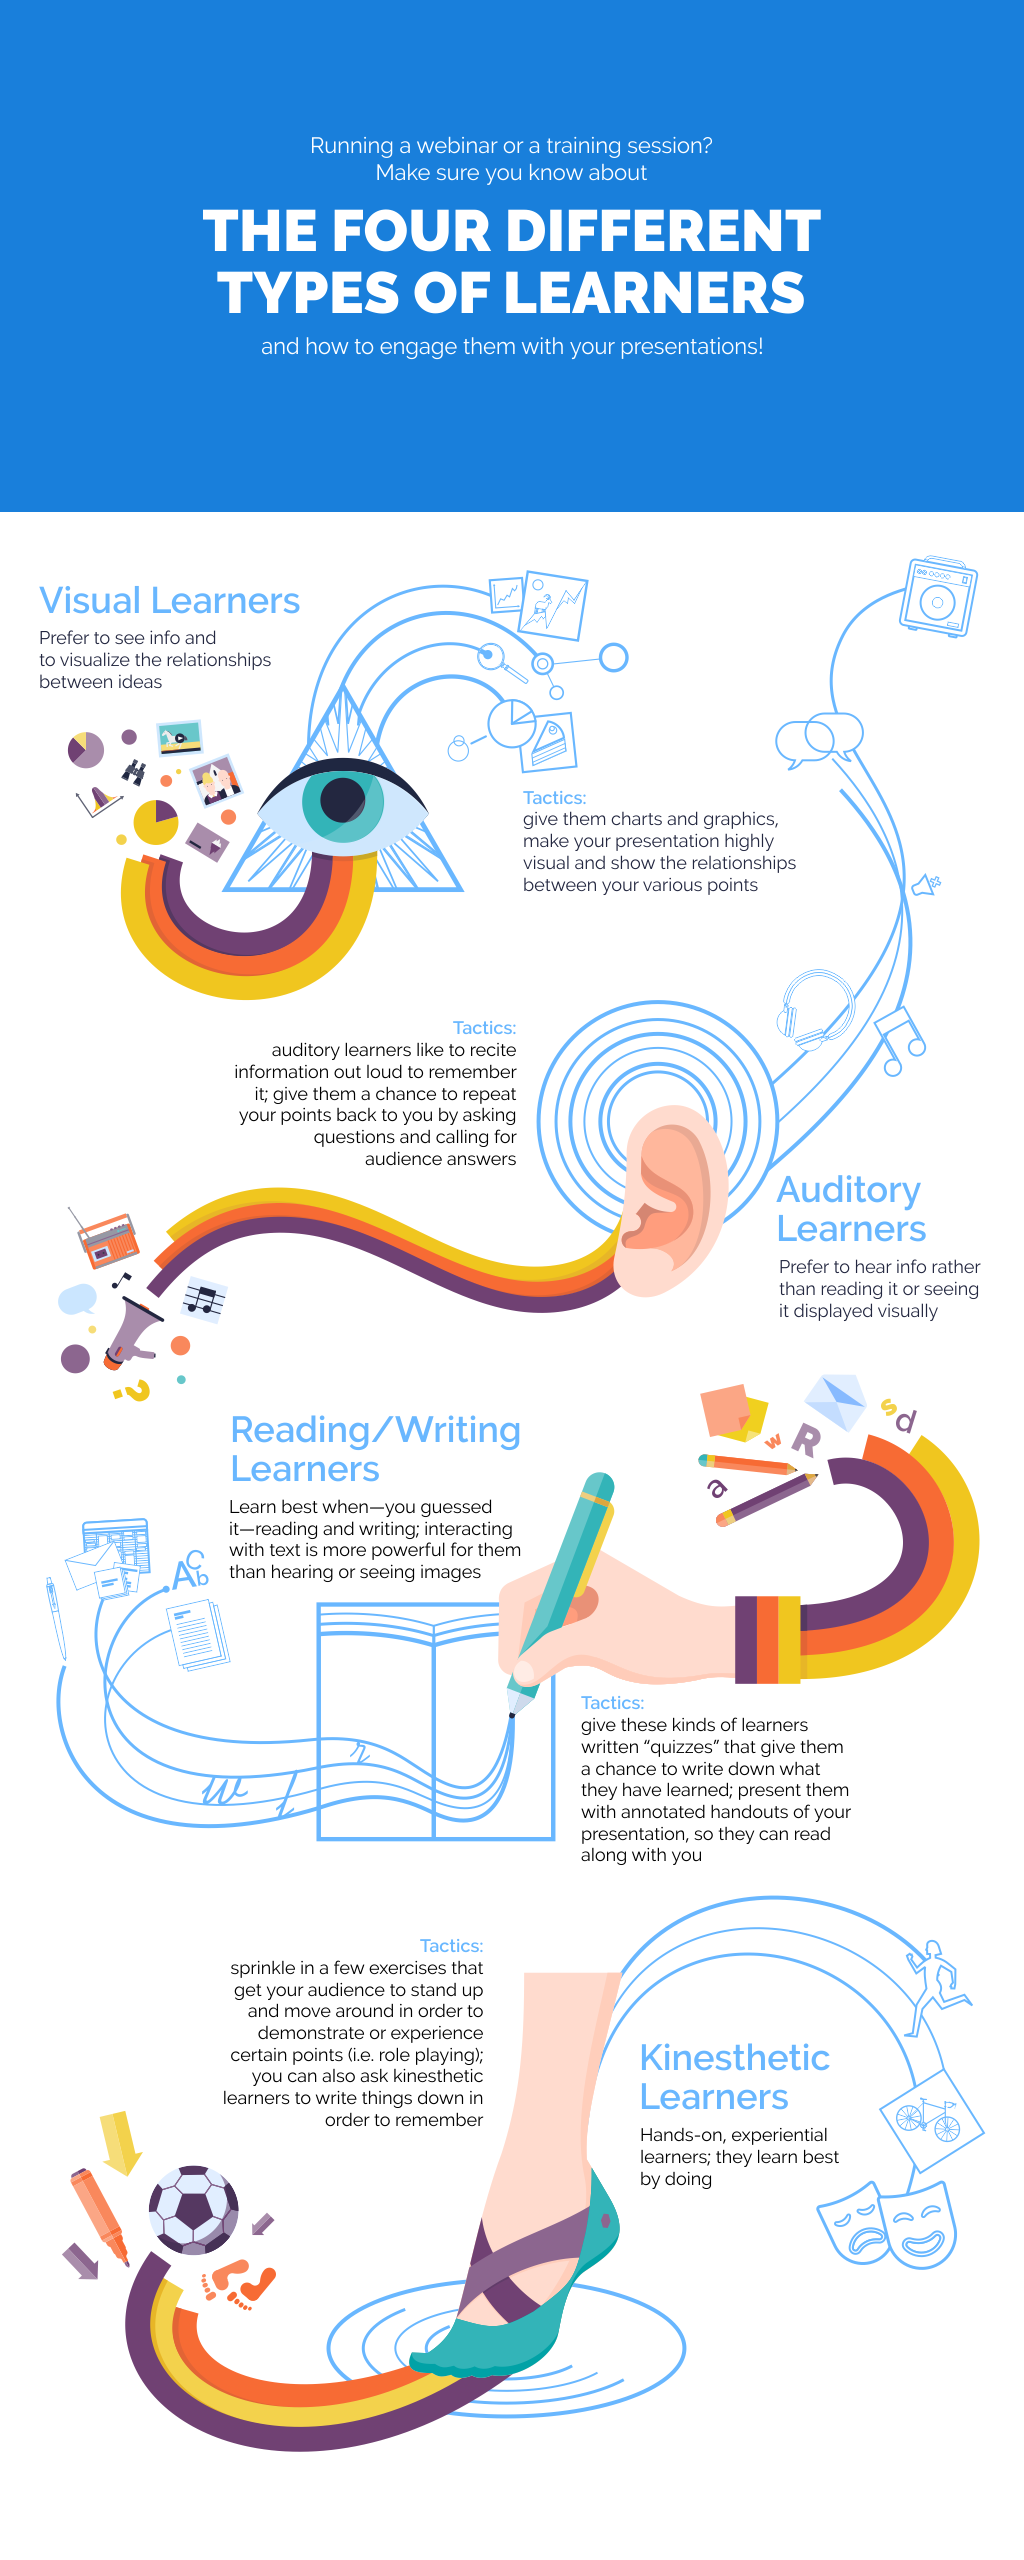 What are the 4 different types of learning?